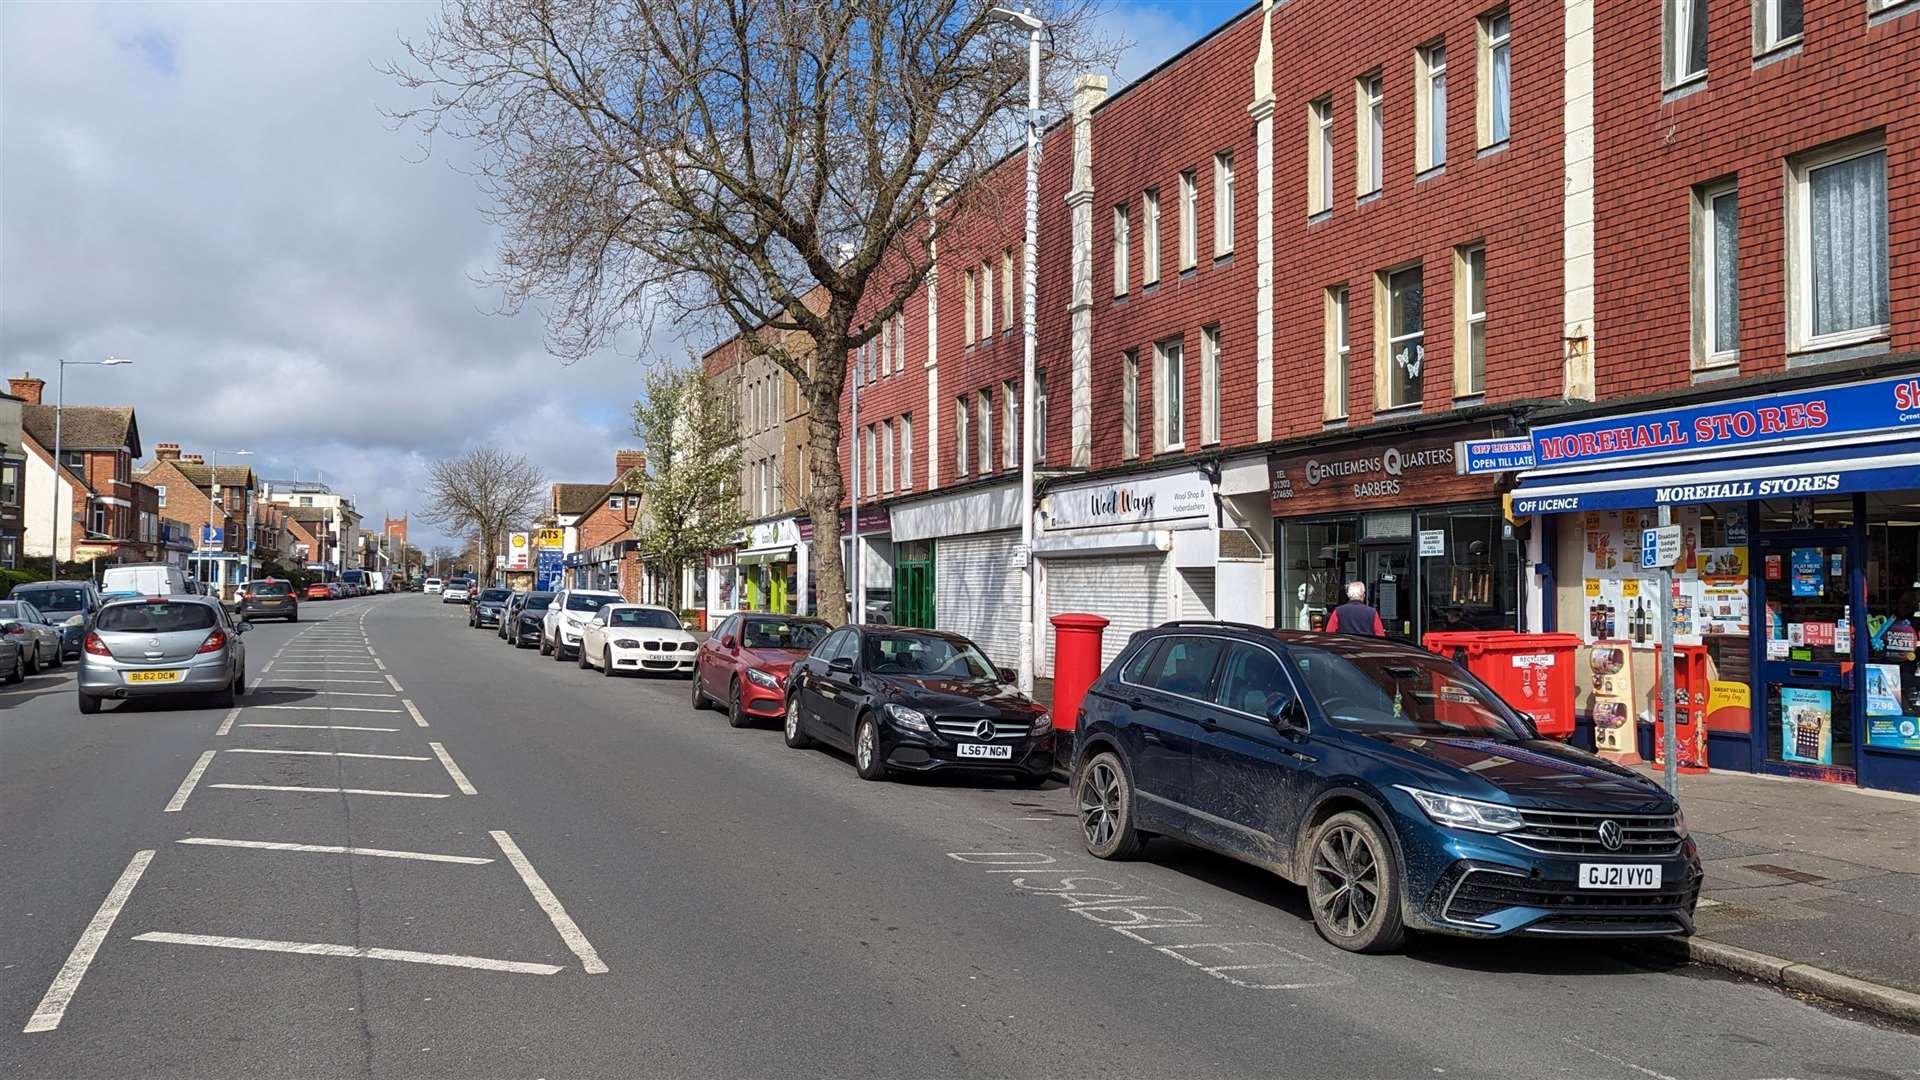 Folkestone and Hythe District Council is proposing the introduction of a Controlled Parking Zone for streets in Cheriton